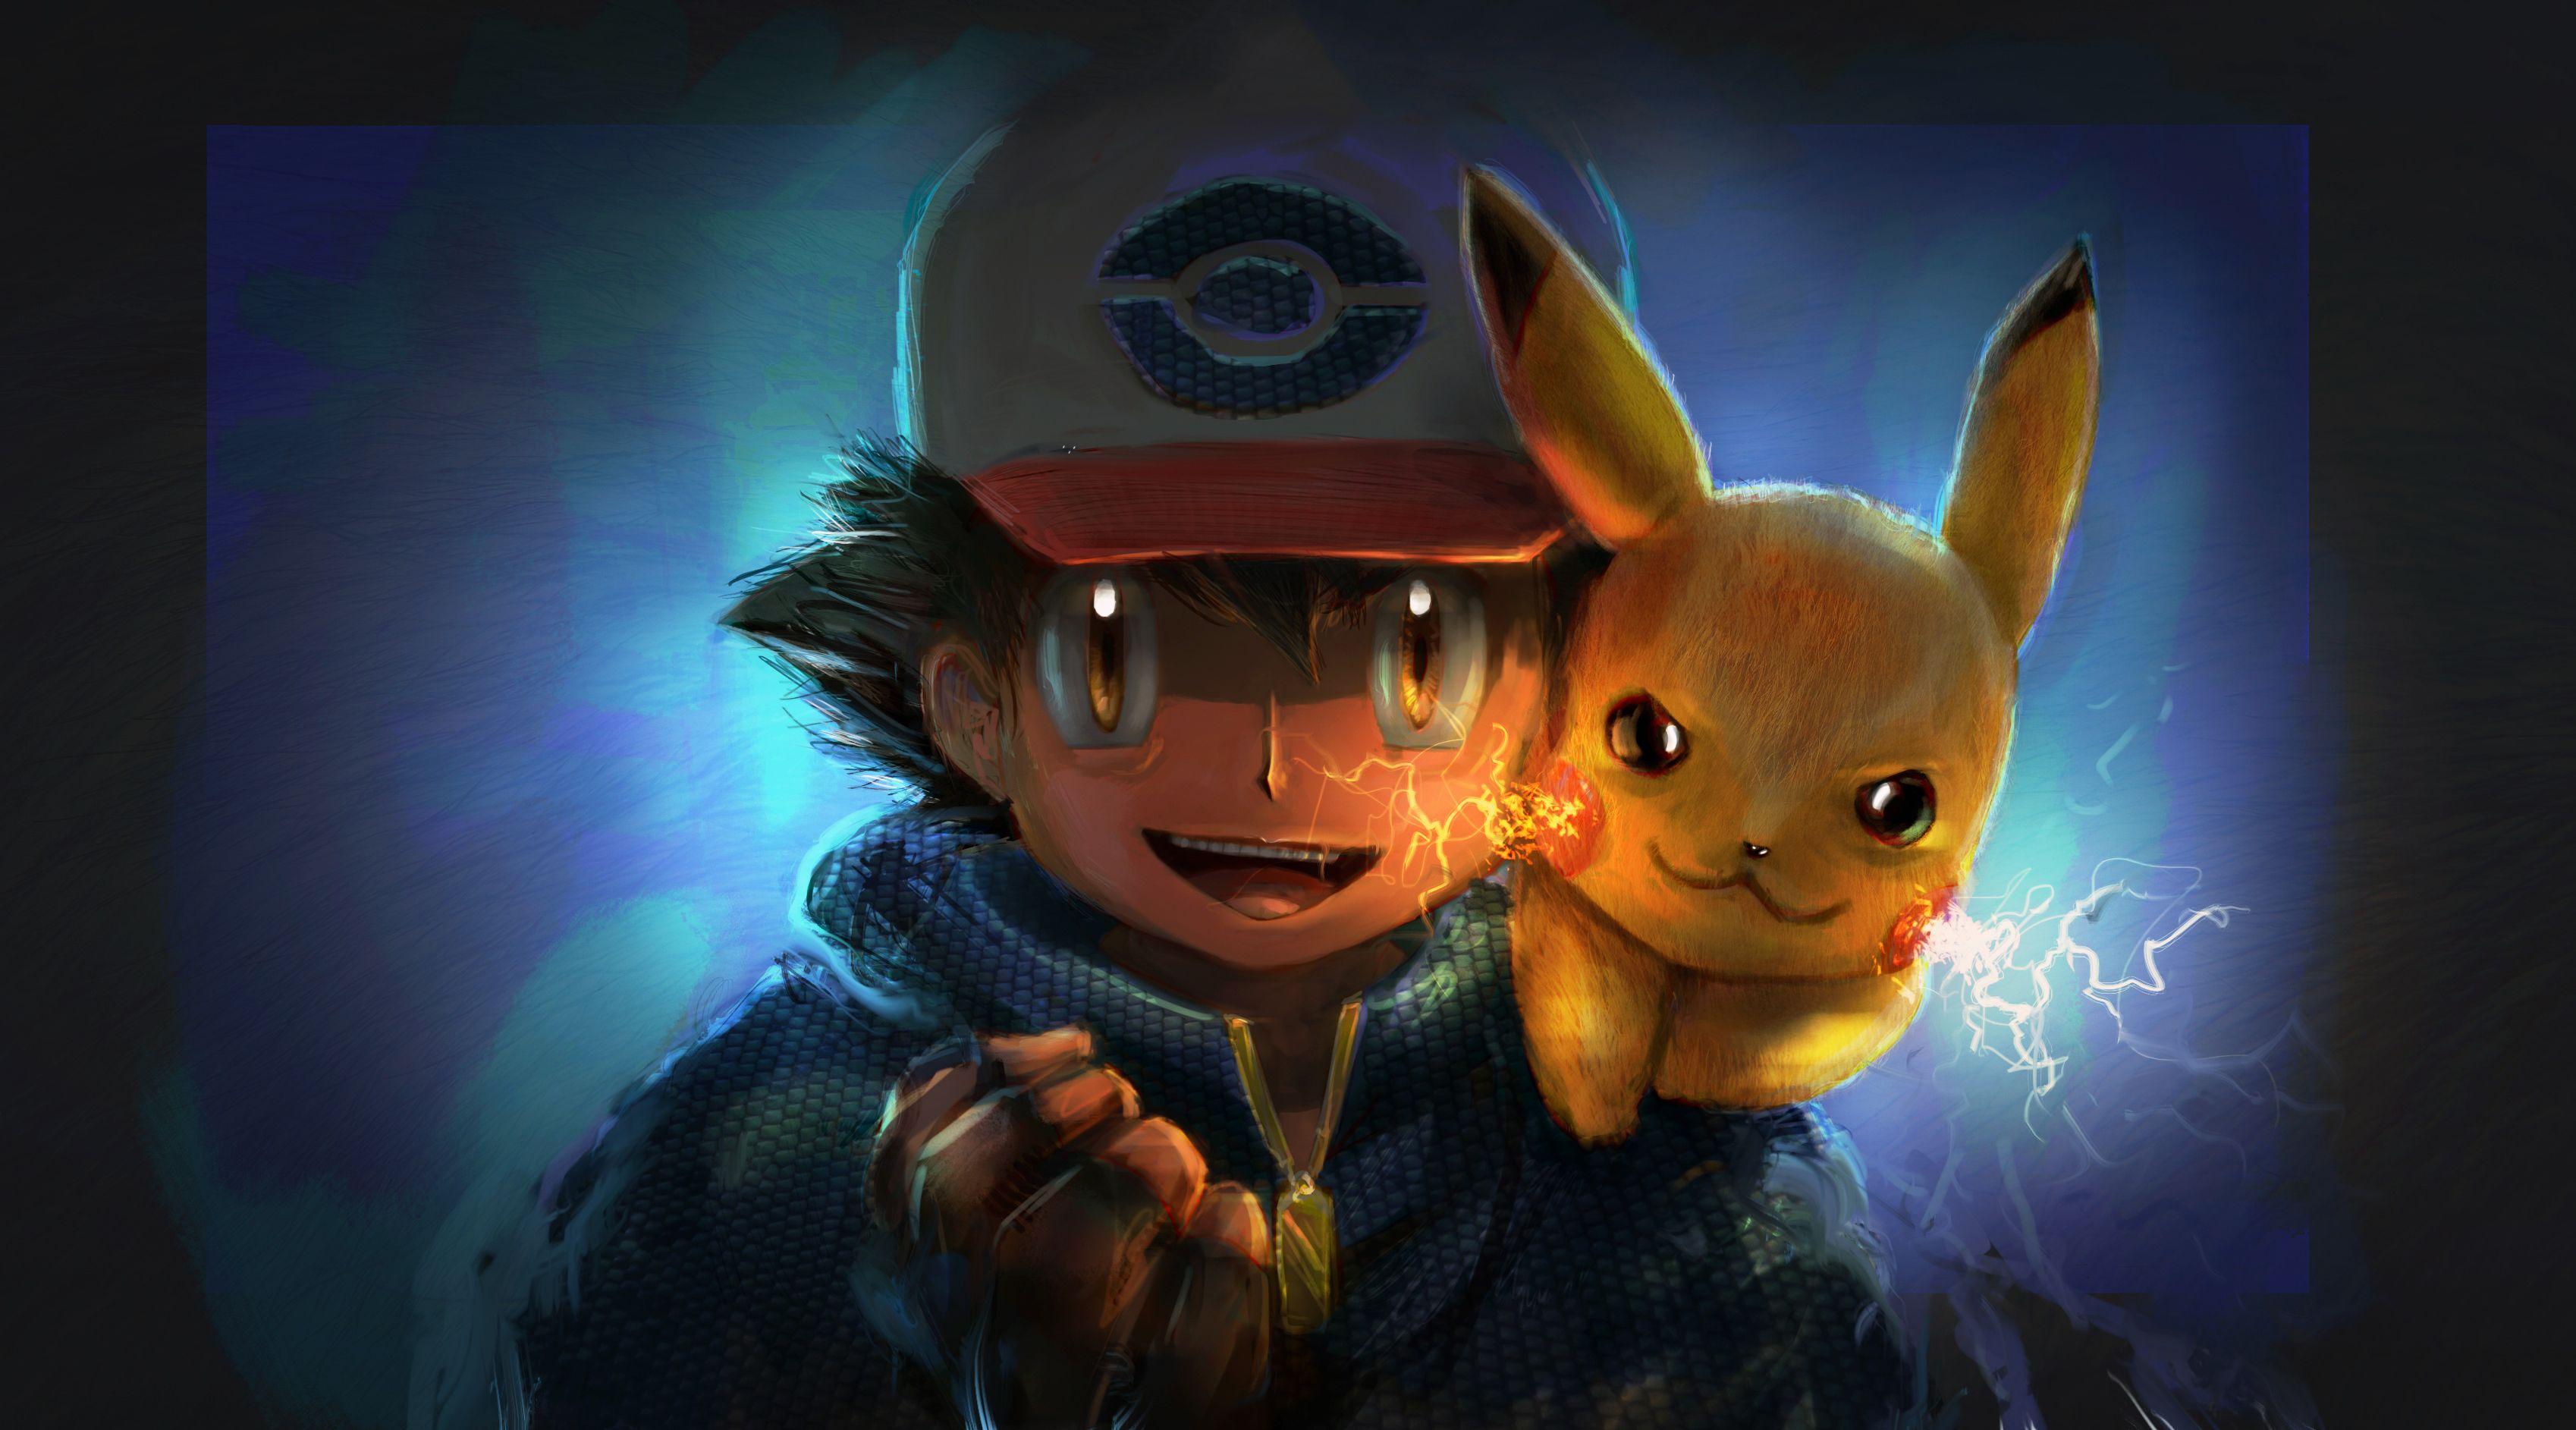 Were going to see Pikachu as a baby in the new Pokémon animeVideo   SoraNews24 Japan News